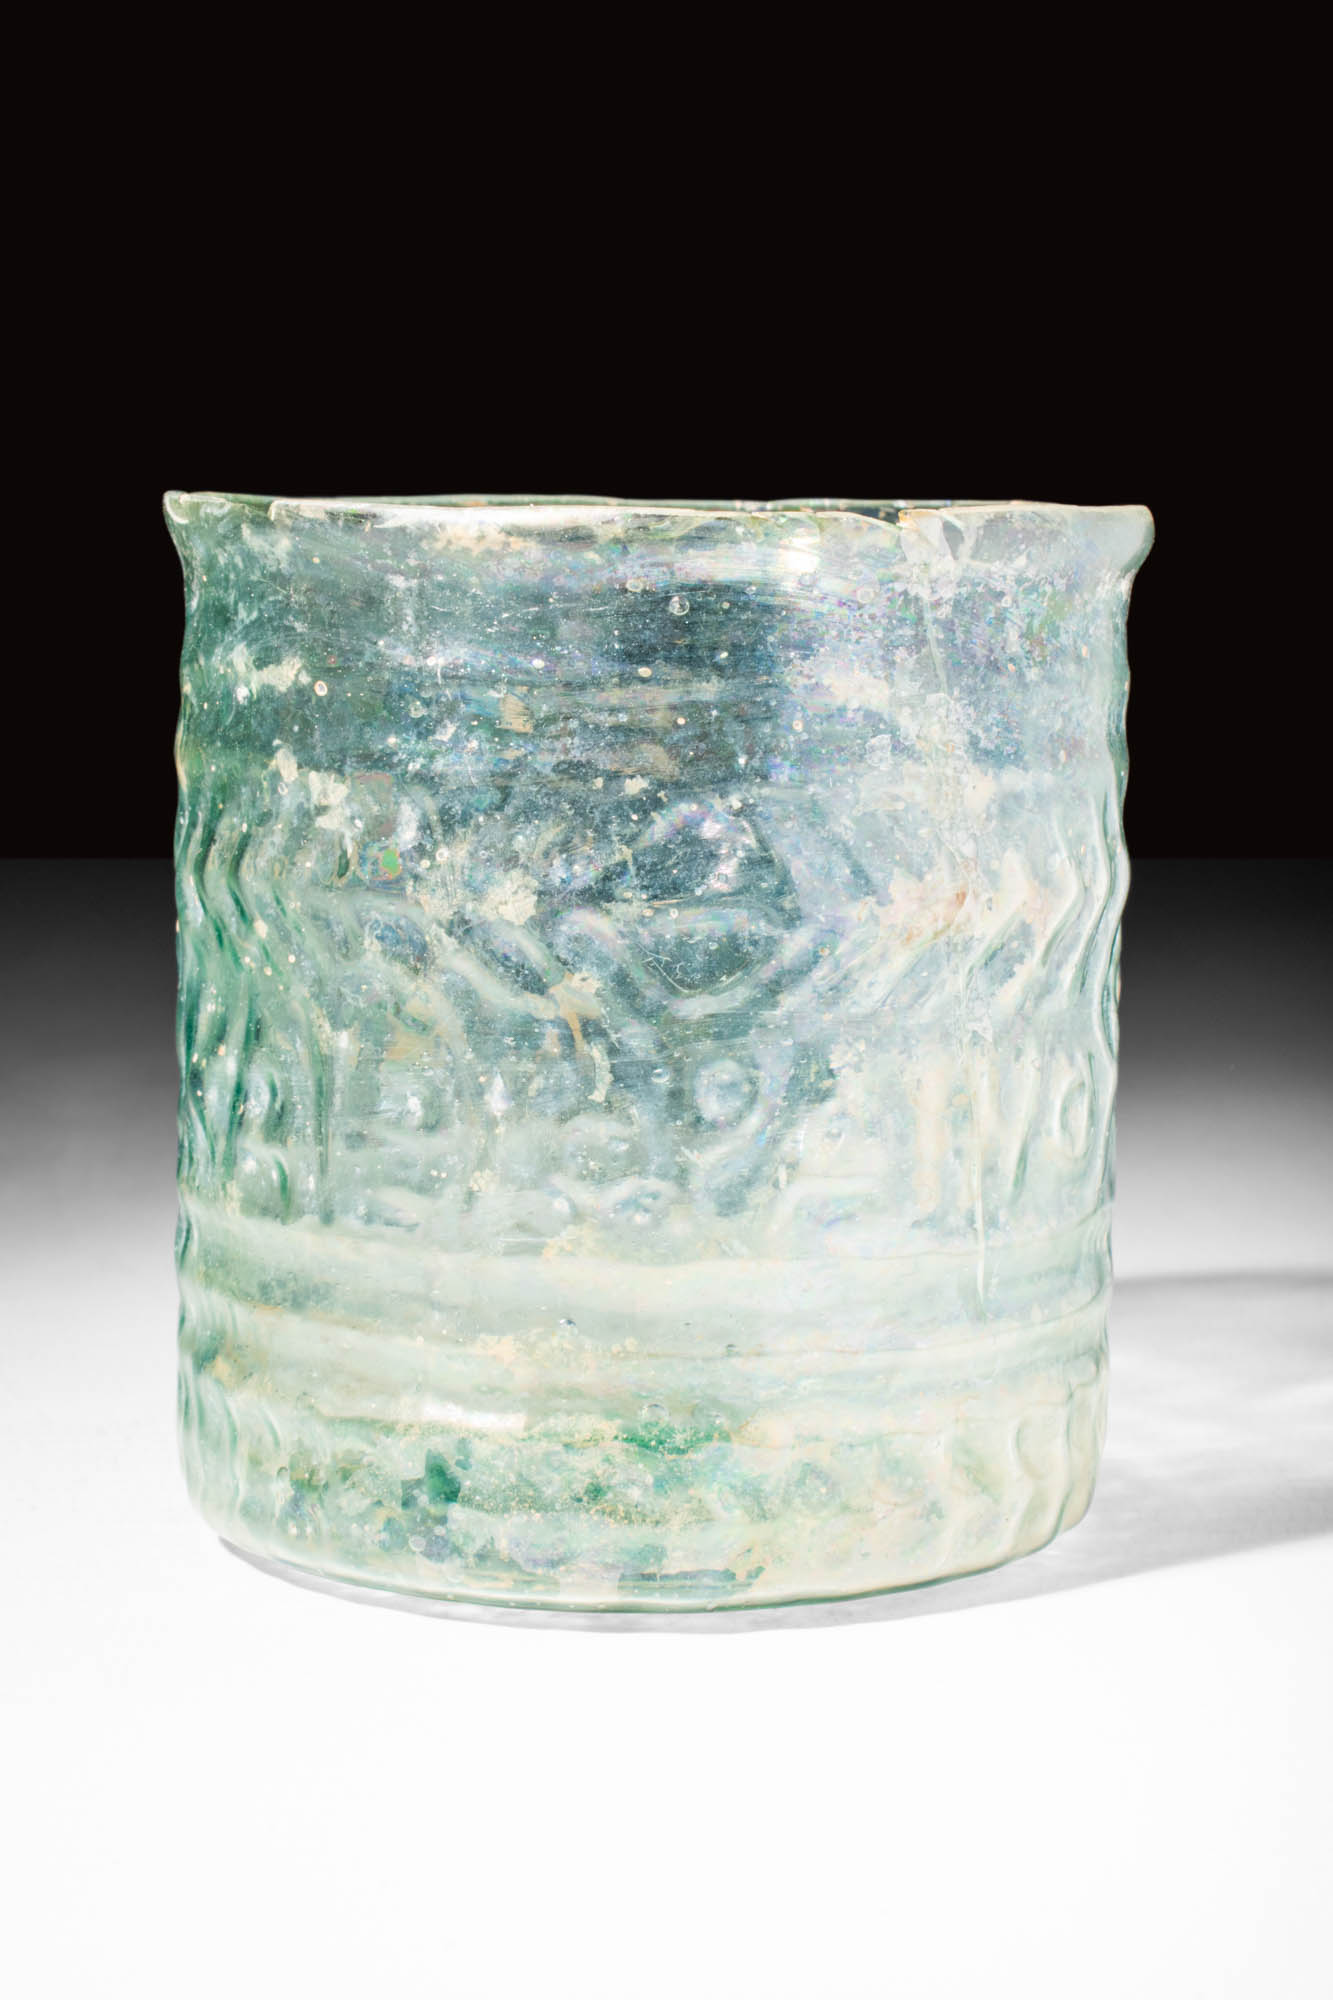 BYZANTINE GLASS CUP DECORATED WITH INSCRIPTION - Image 3 of 5